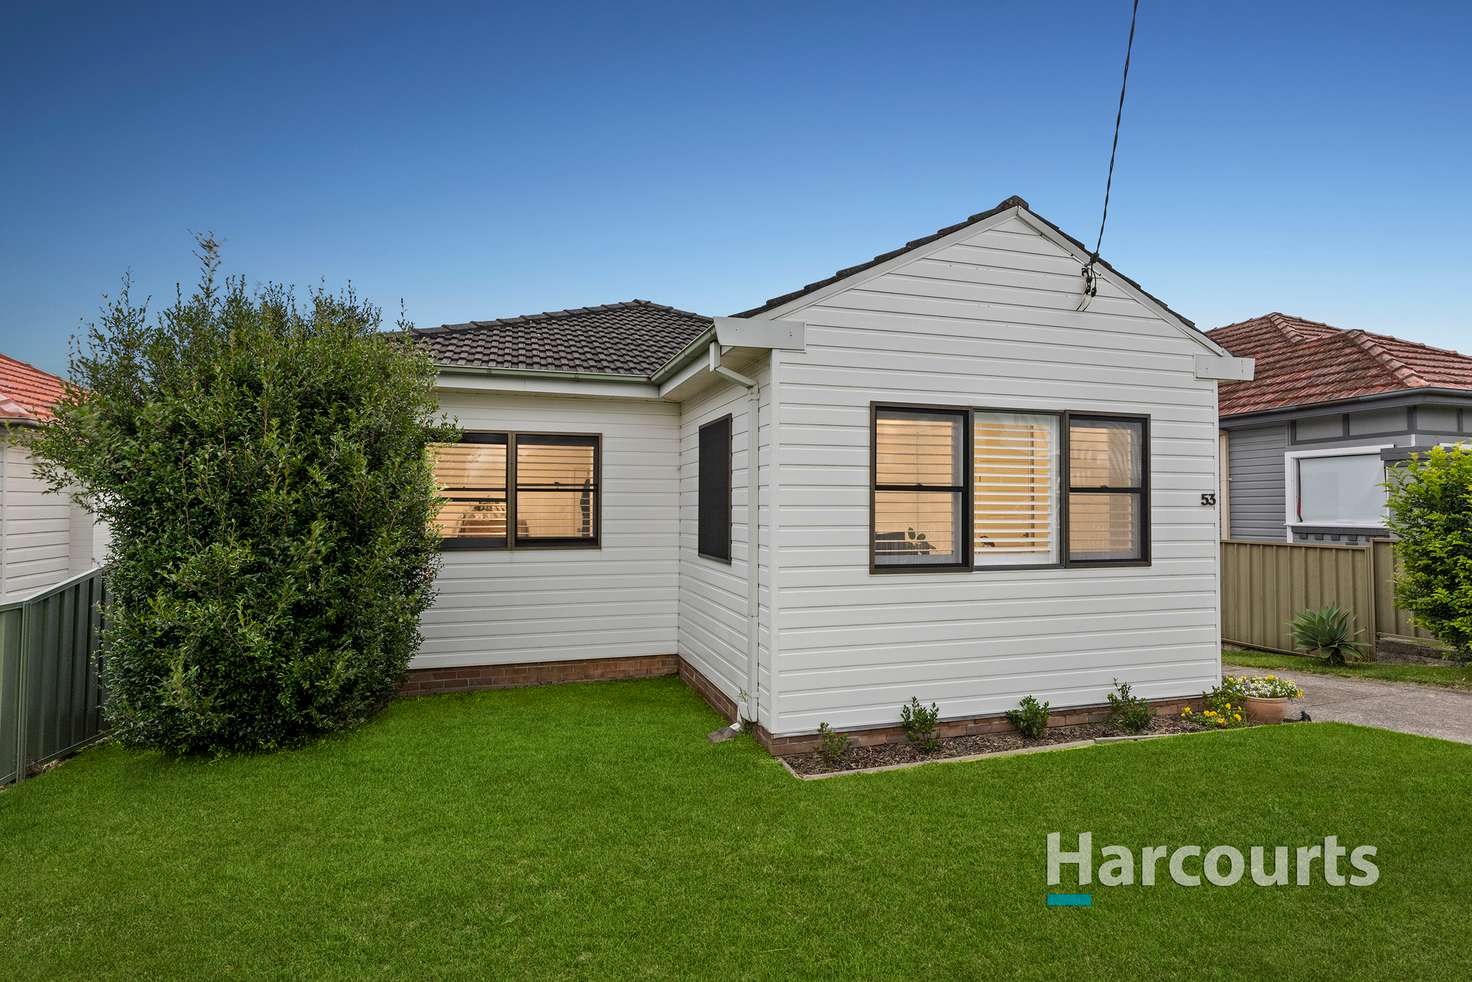 Main view of Homely house listing, 53 Dent Street, North Lambton NSW 2299